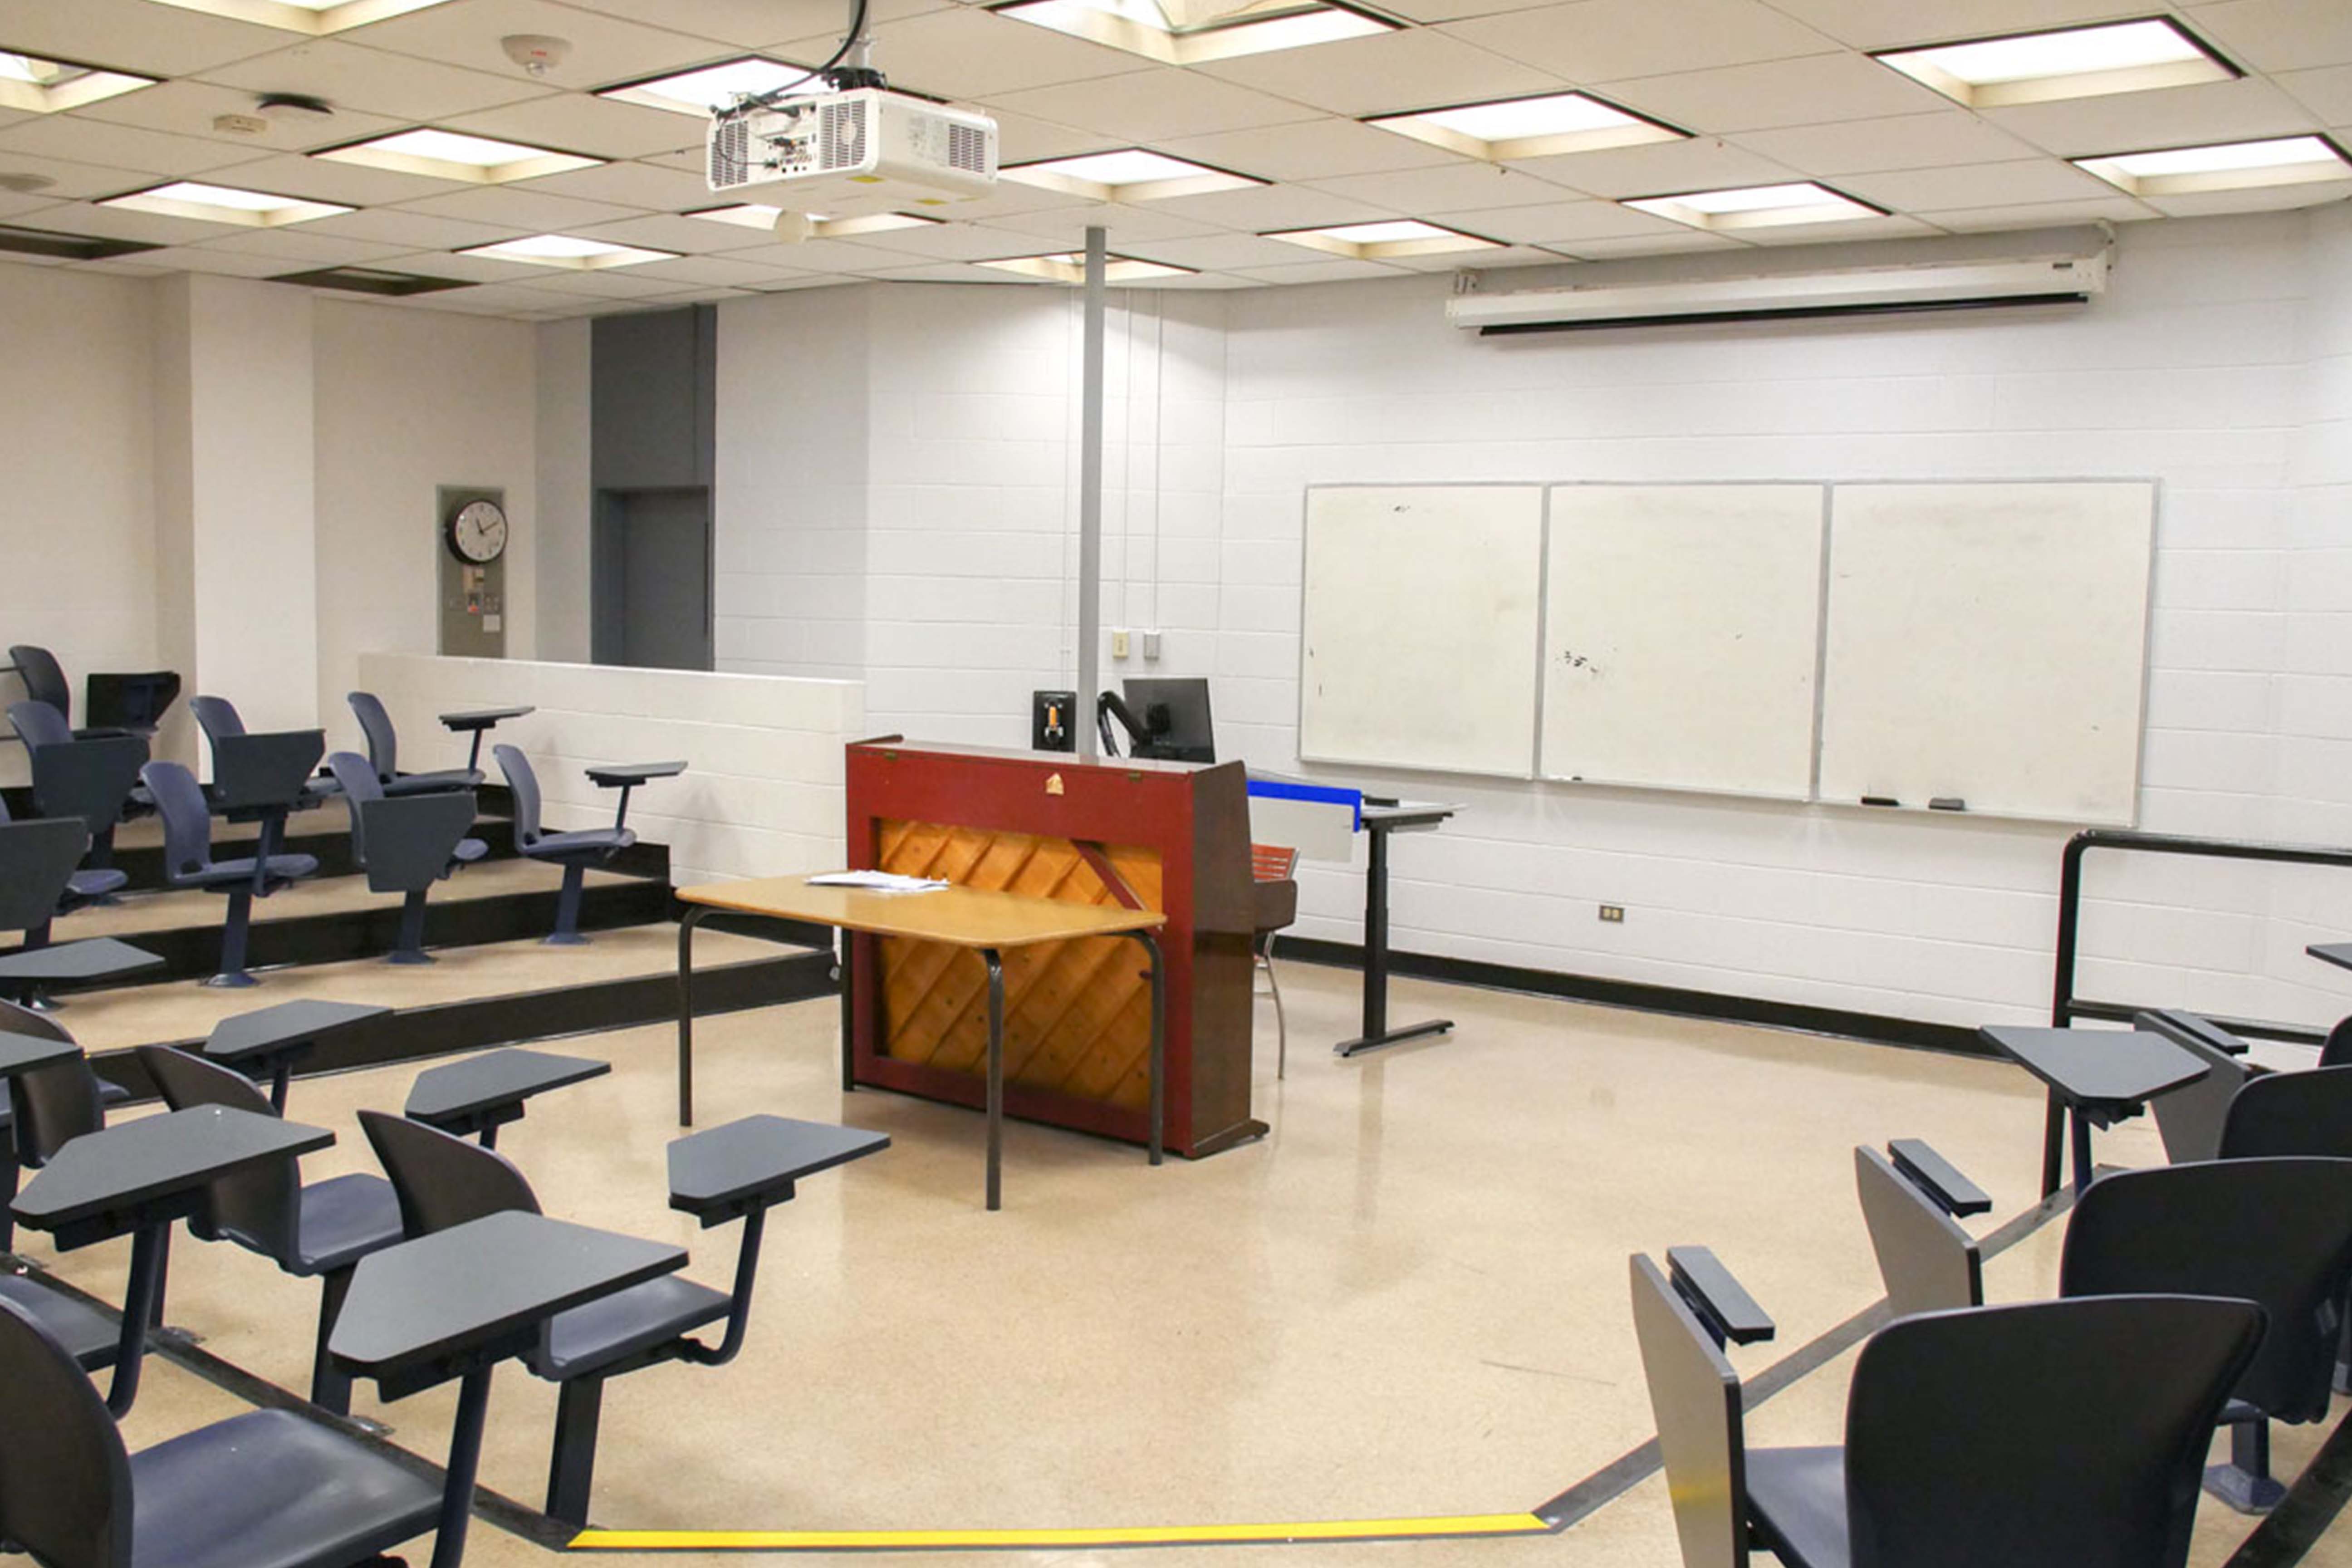 Student view of classroom in the Podium Building  following renovations